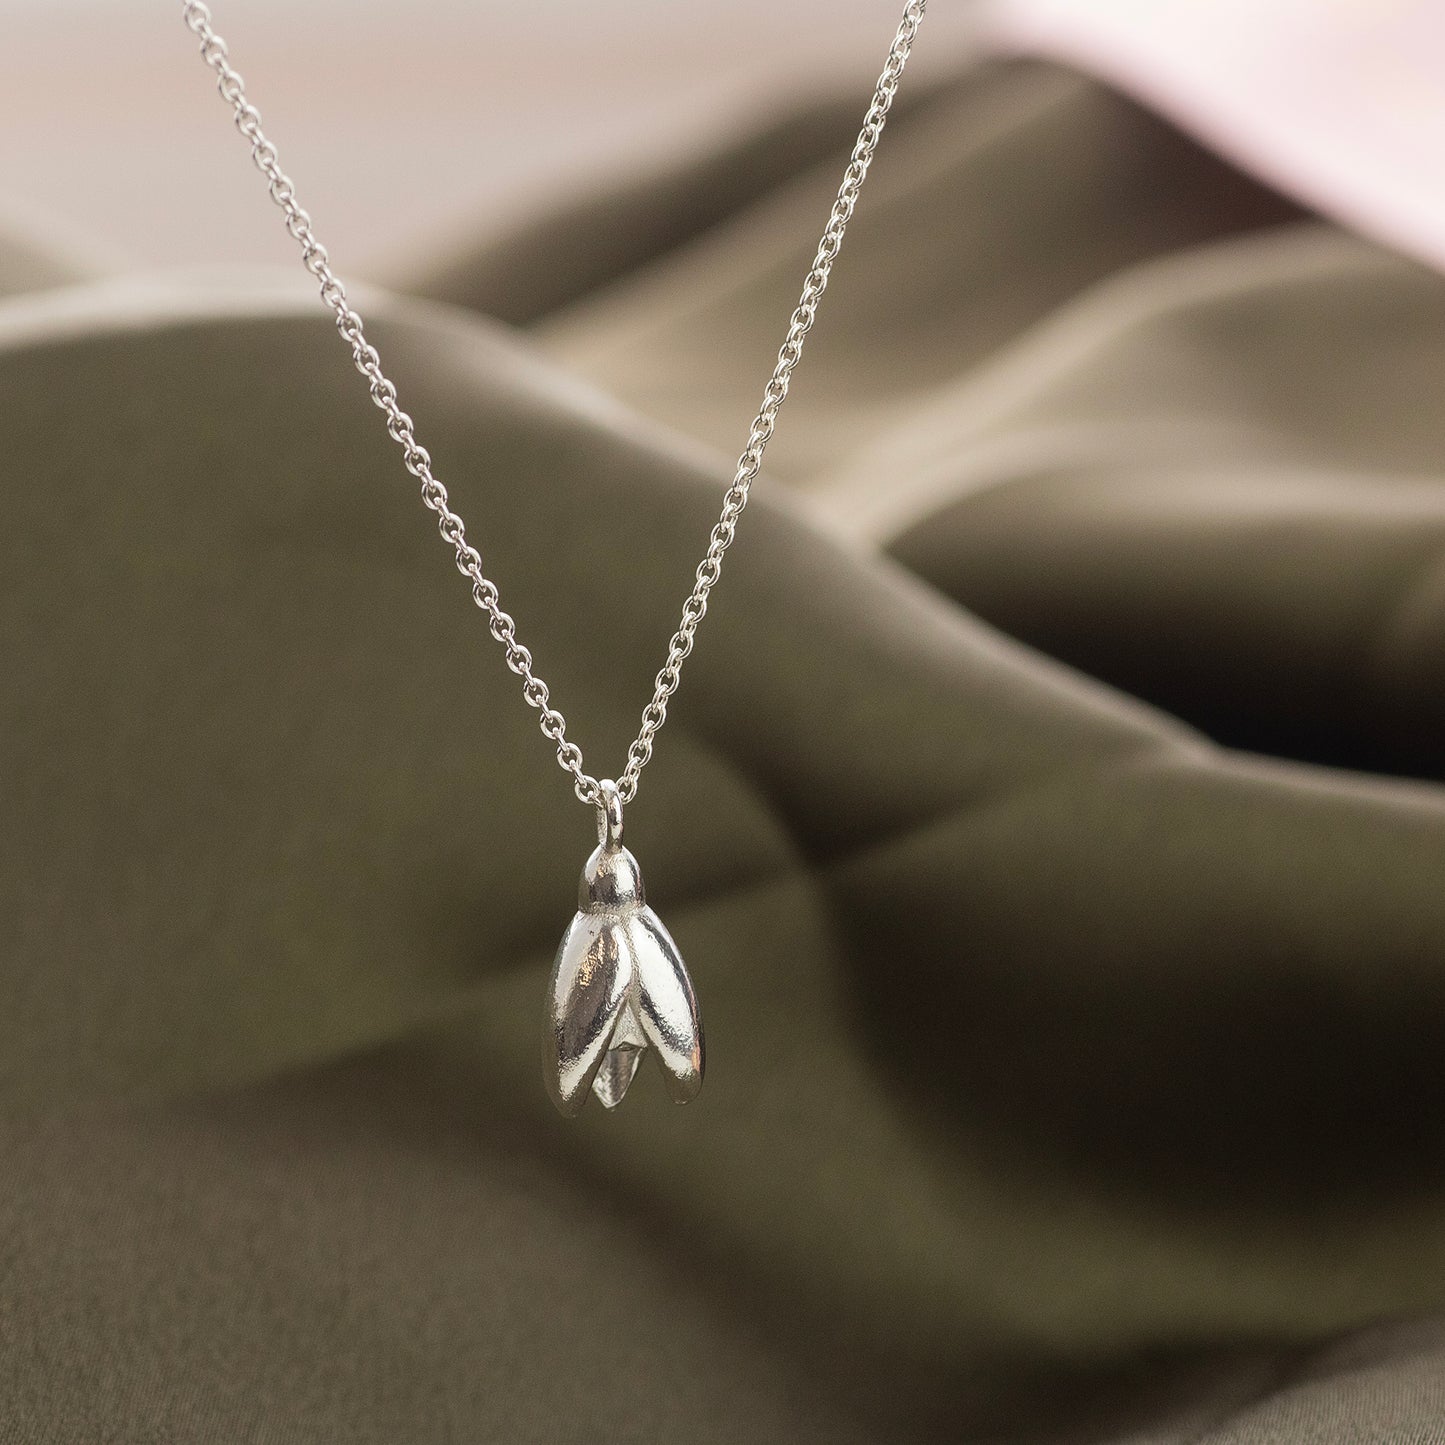 Snowdrop Necklace - Resilience